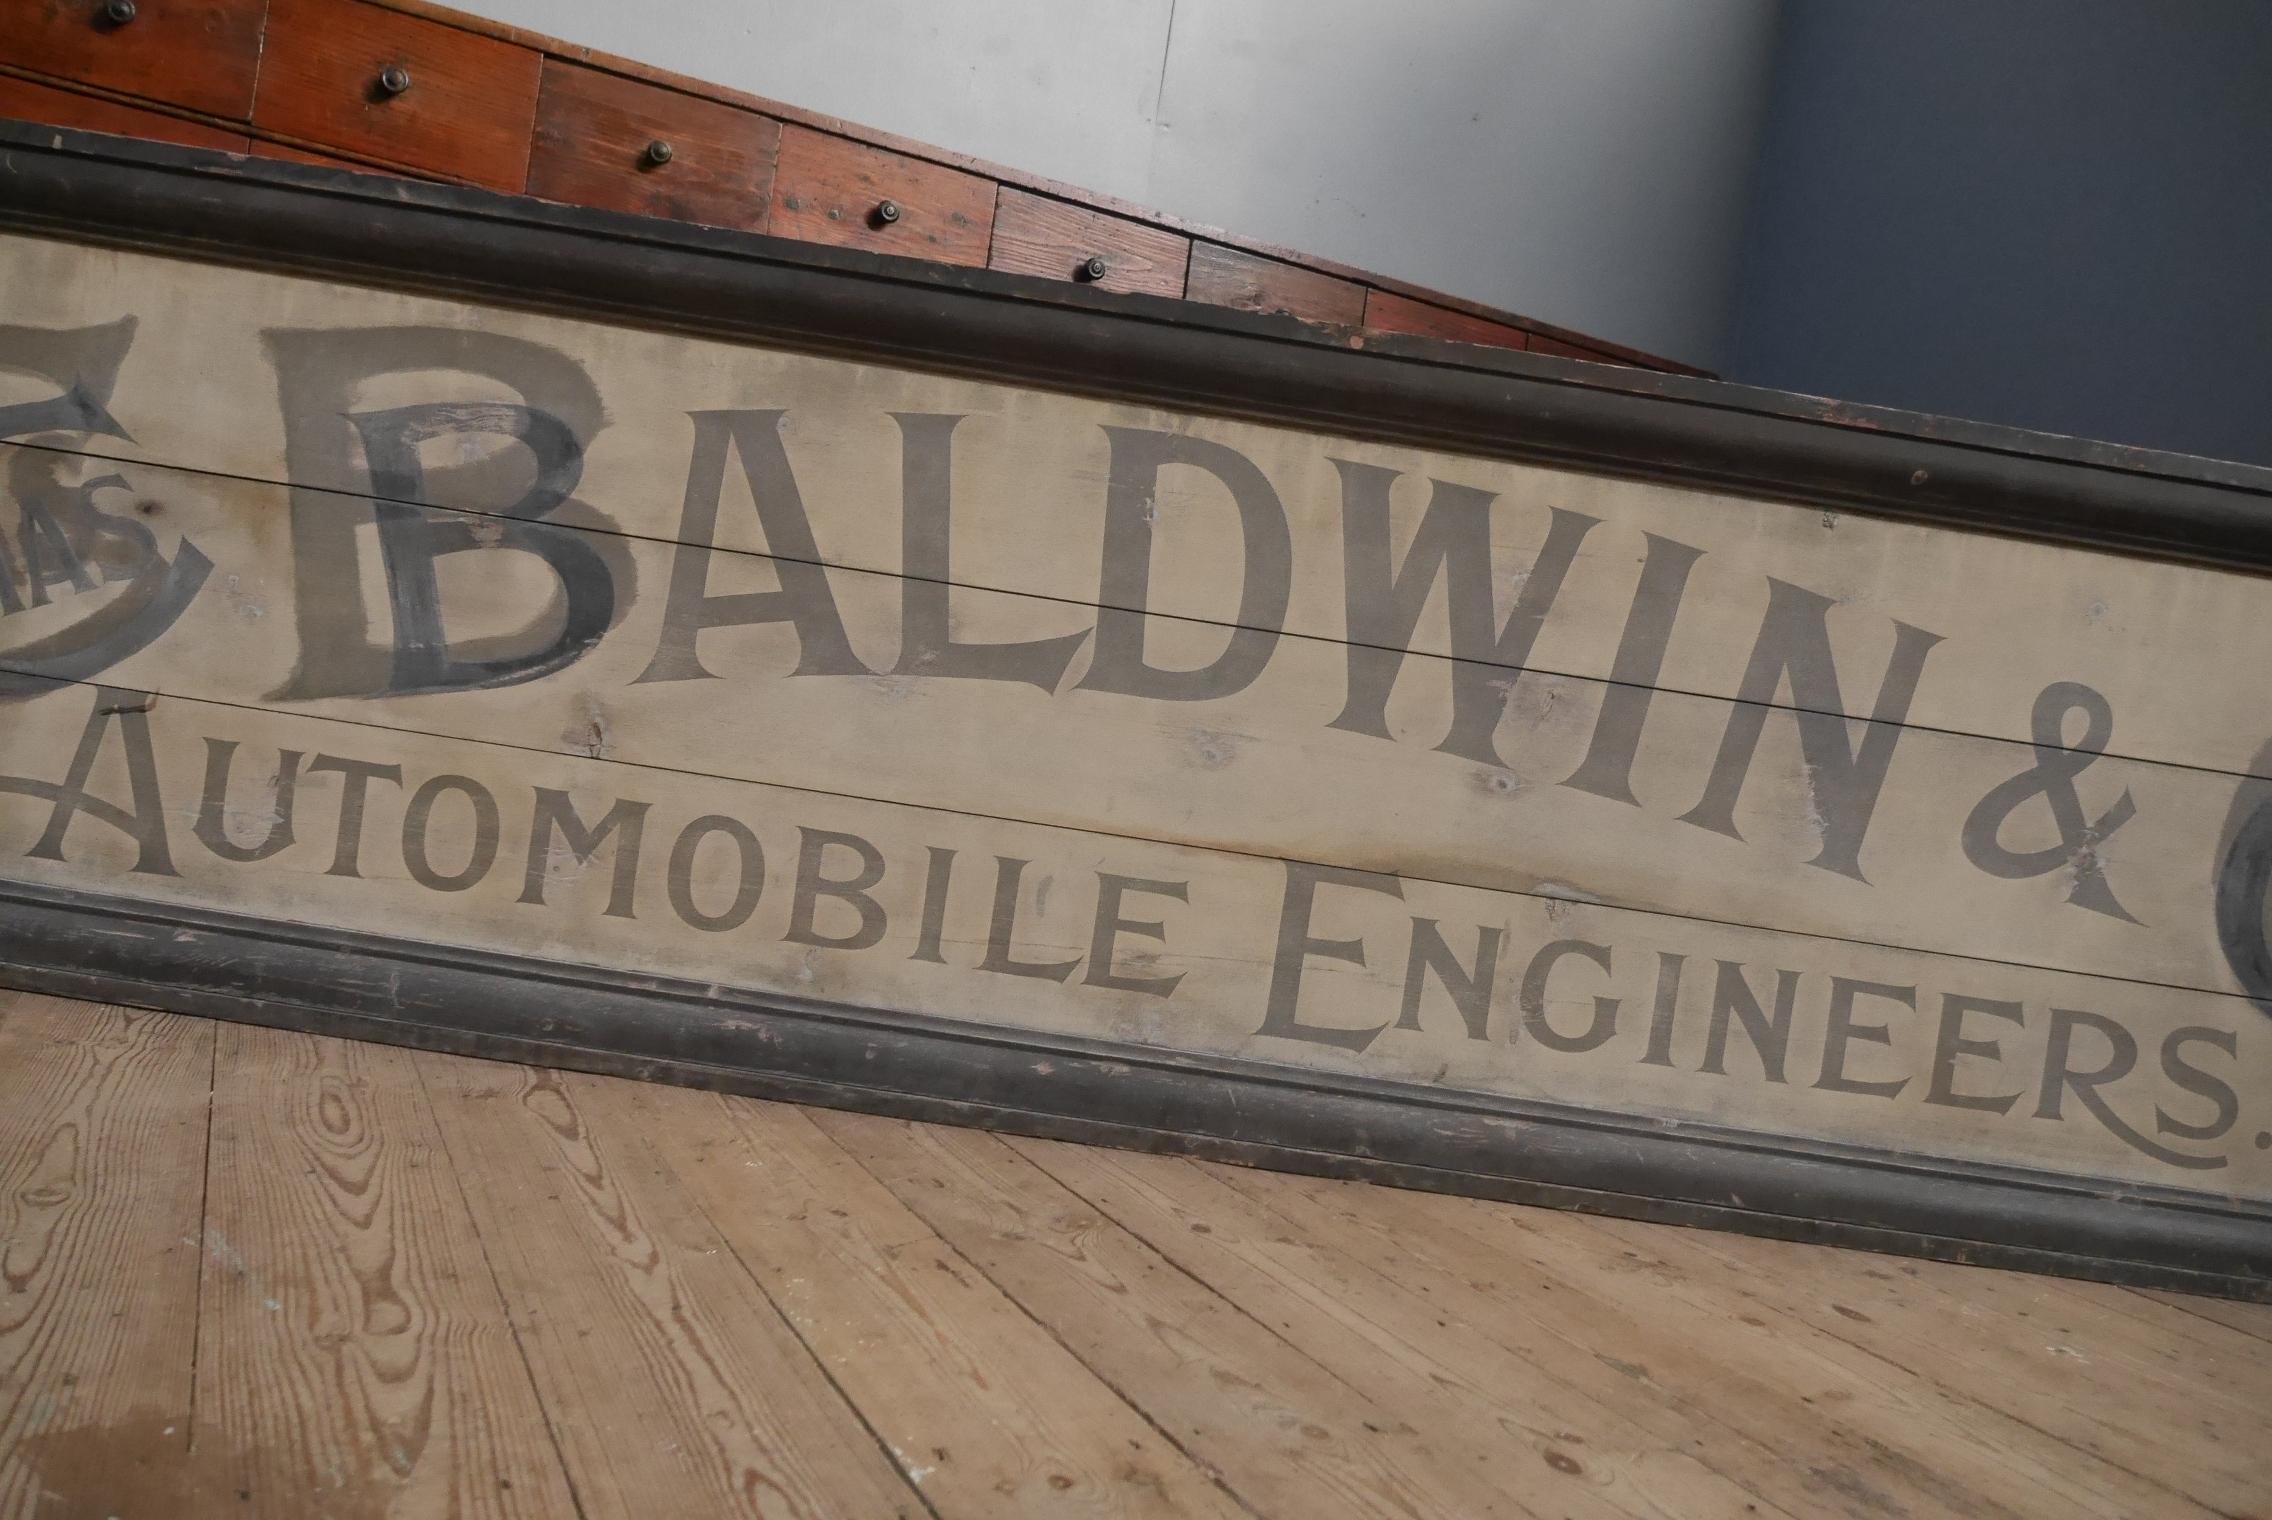 Early 20th Century Huge Antique Garage Trade Sign, Chas Baldwin Automobile Engineer For Sale